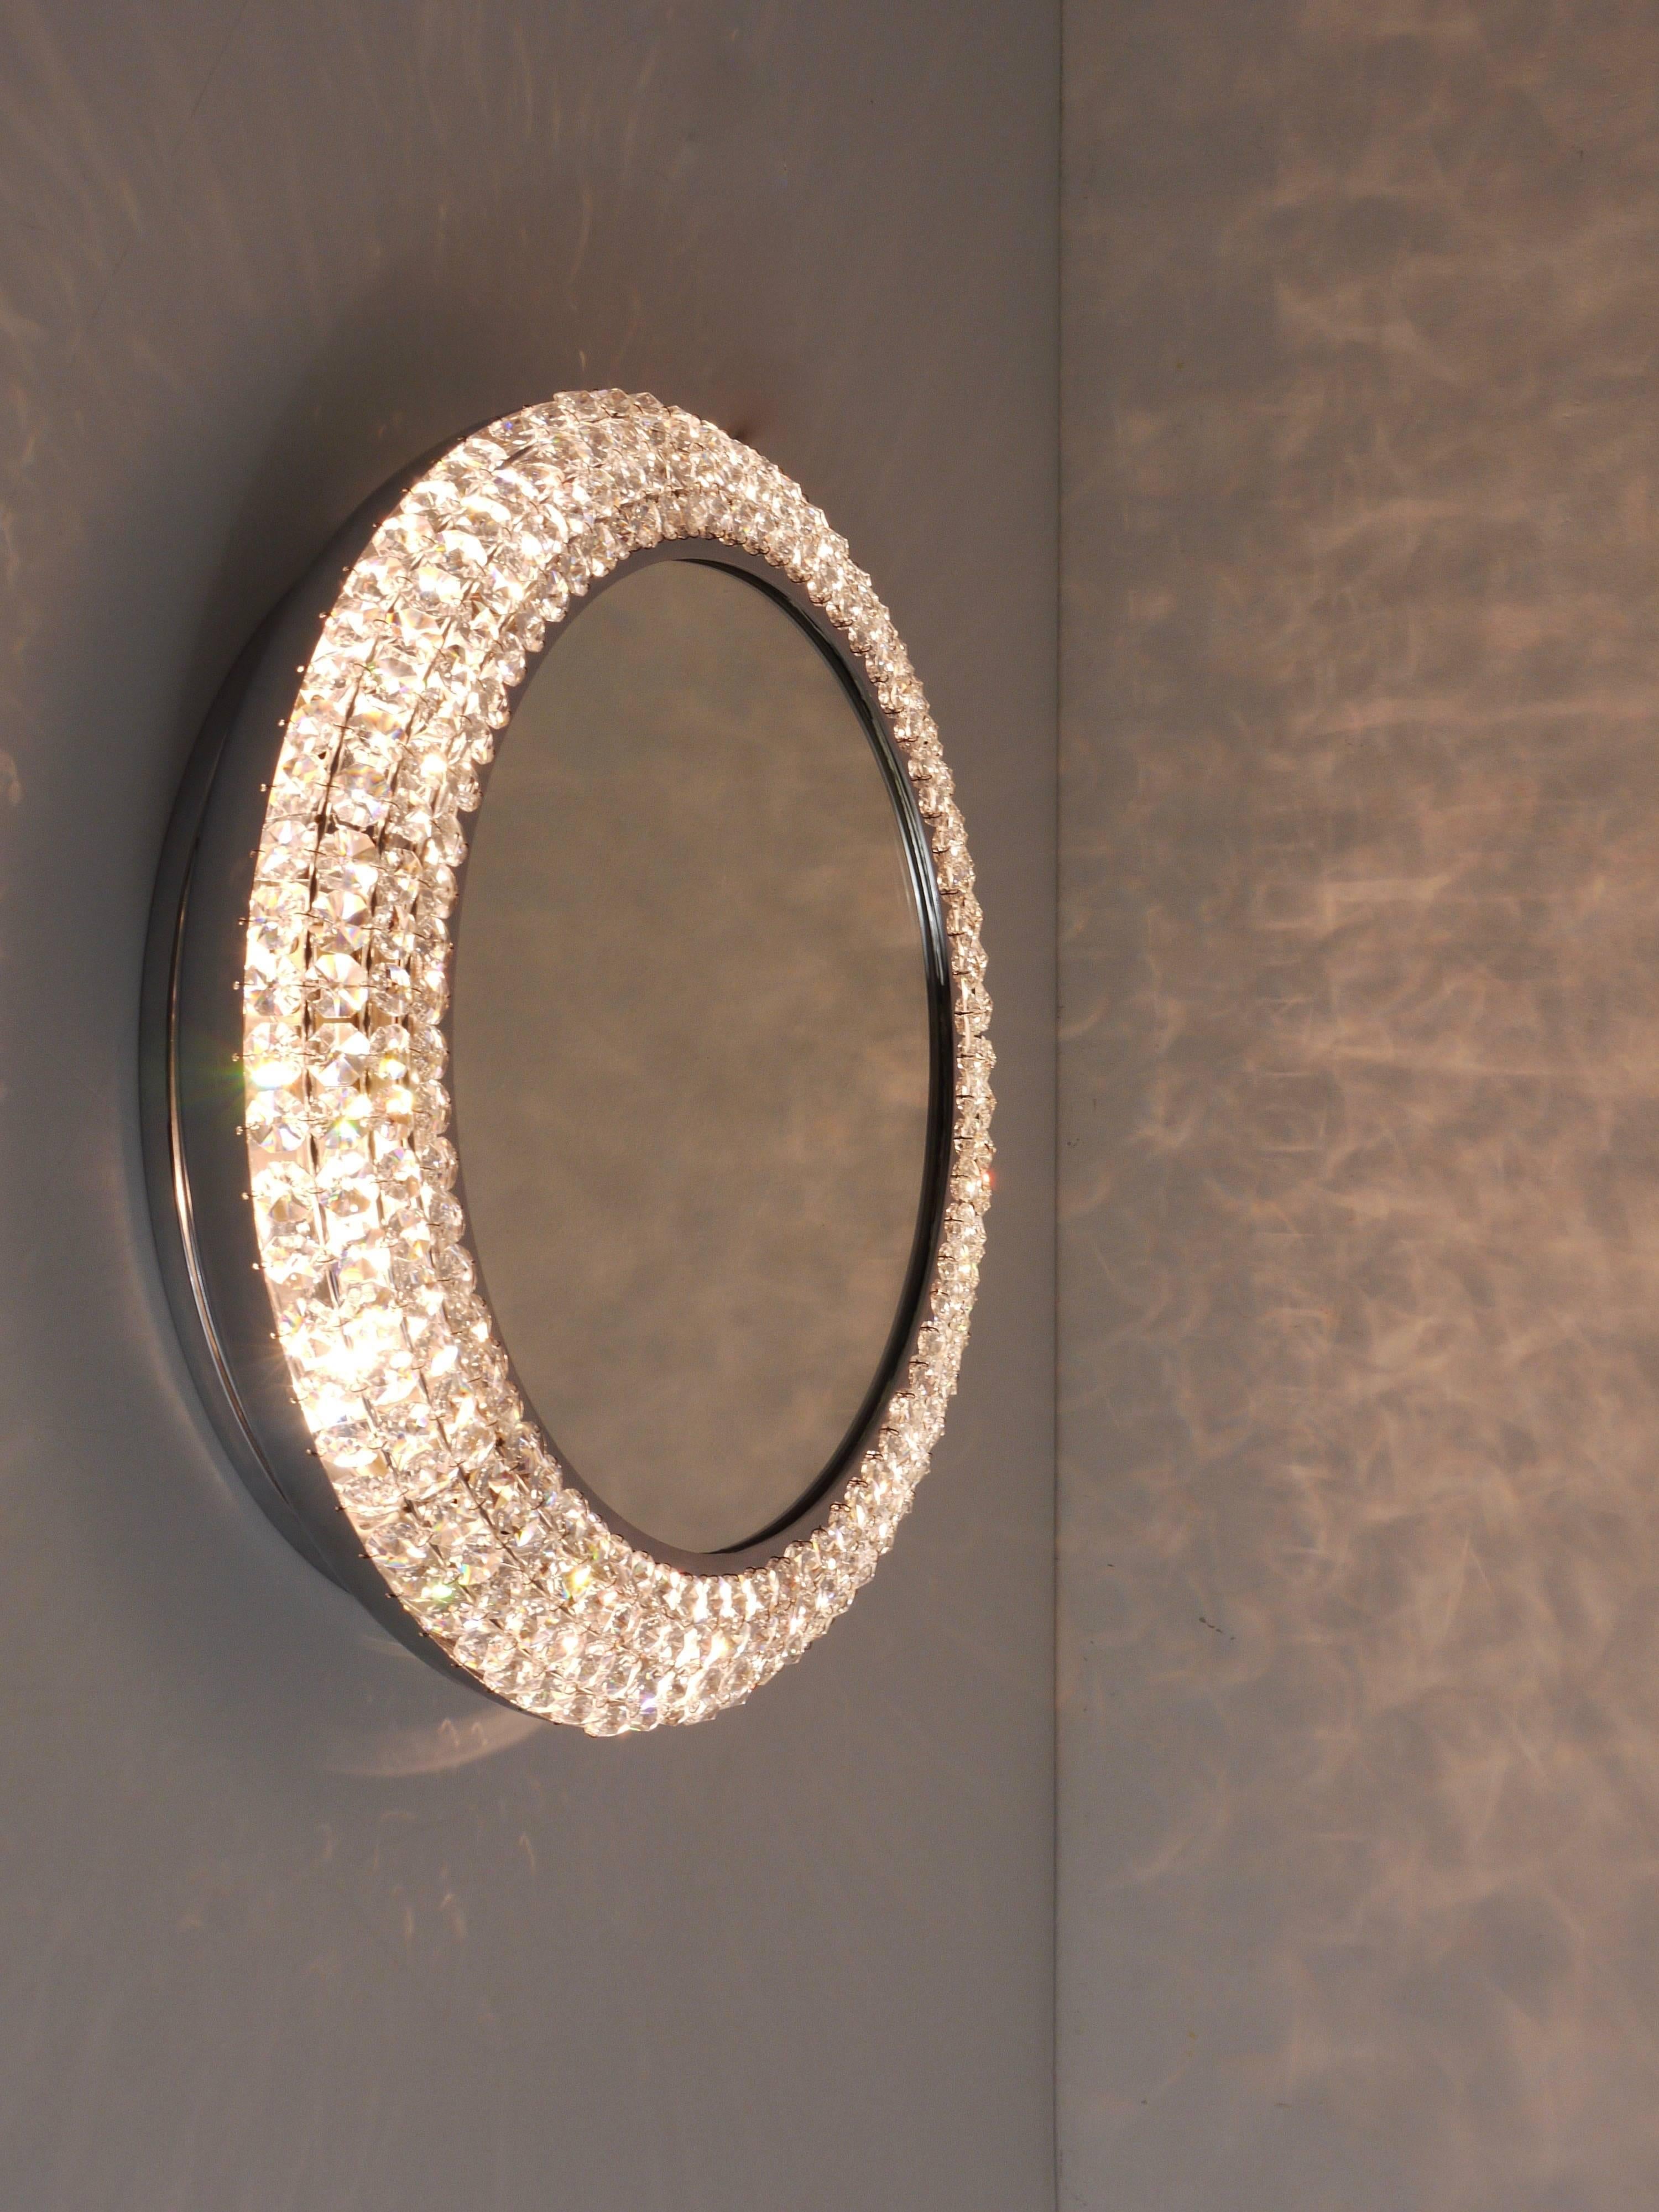 A beautiful round Mid-Century illuminated wall mirror with a chrome-plated frame covered with faceted crystals. Austria, 1950s Excellent quality, this is a handmade piece. Has four light sources and is in very good condition.